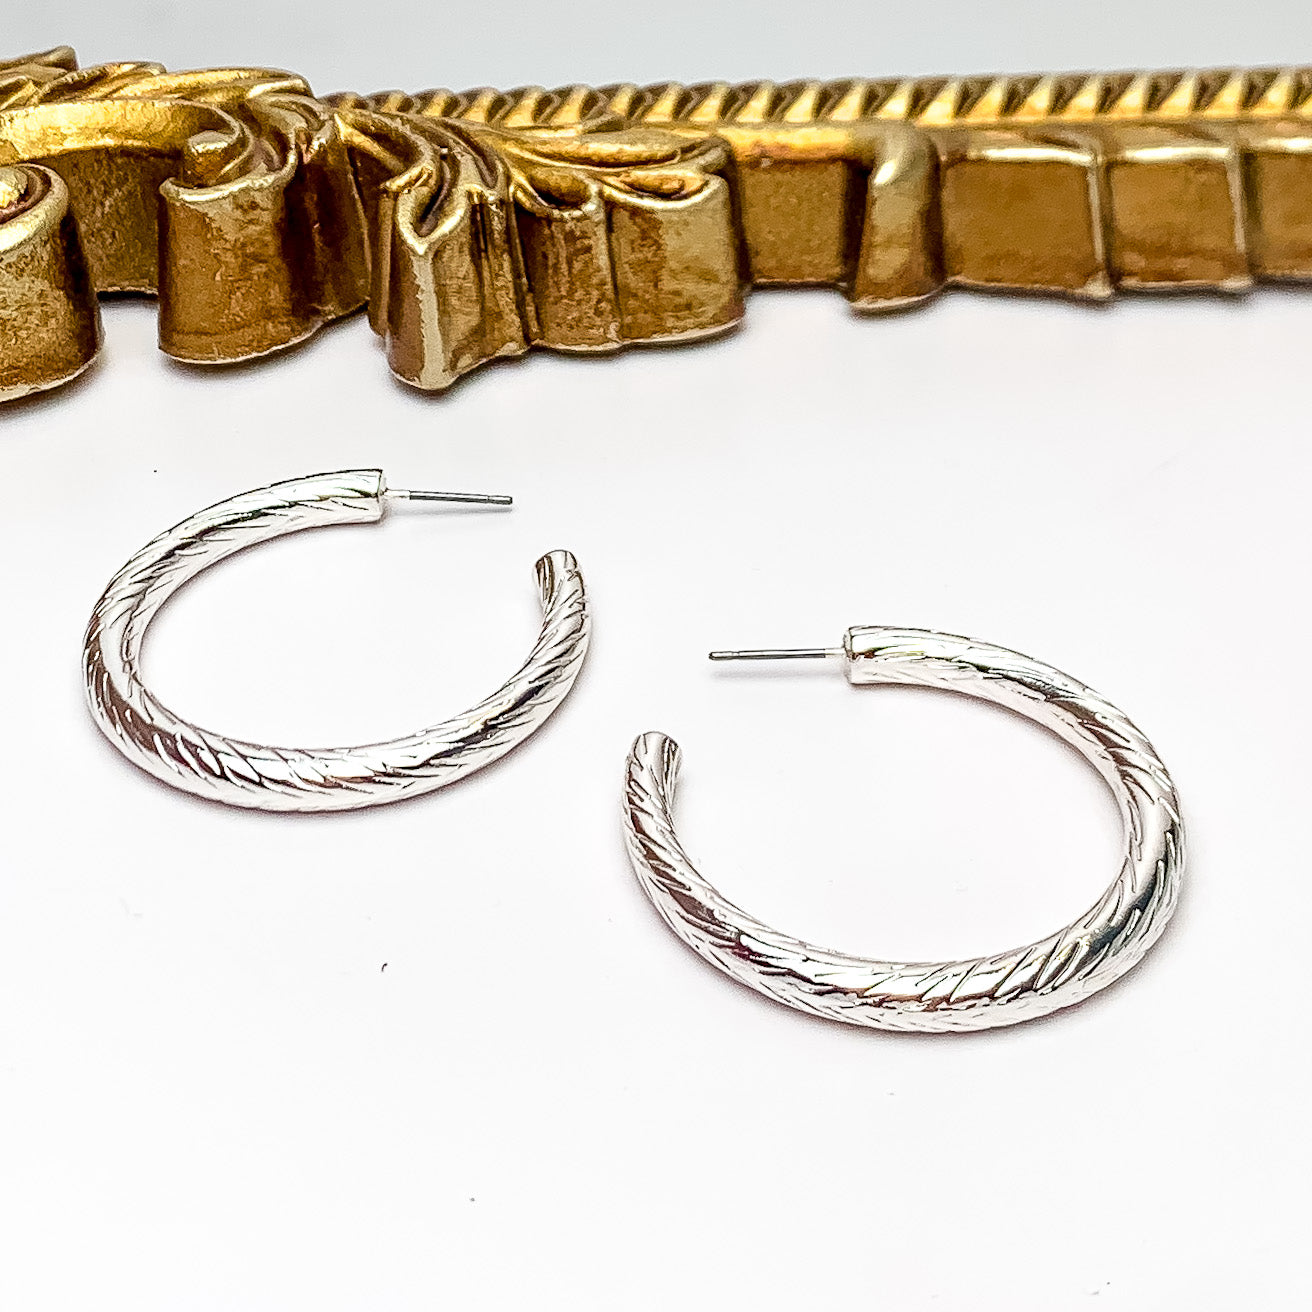 Silver Tone Large Twisted Hoop Earrings. Pictured on a white background with gold frame above the earrings.